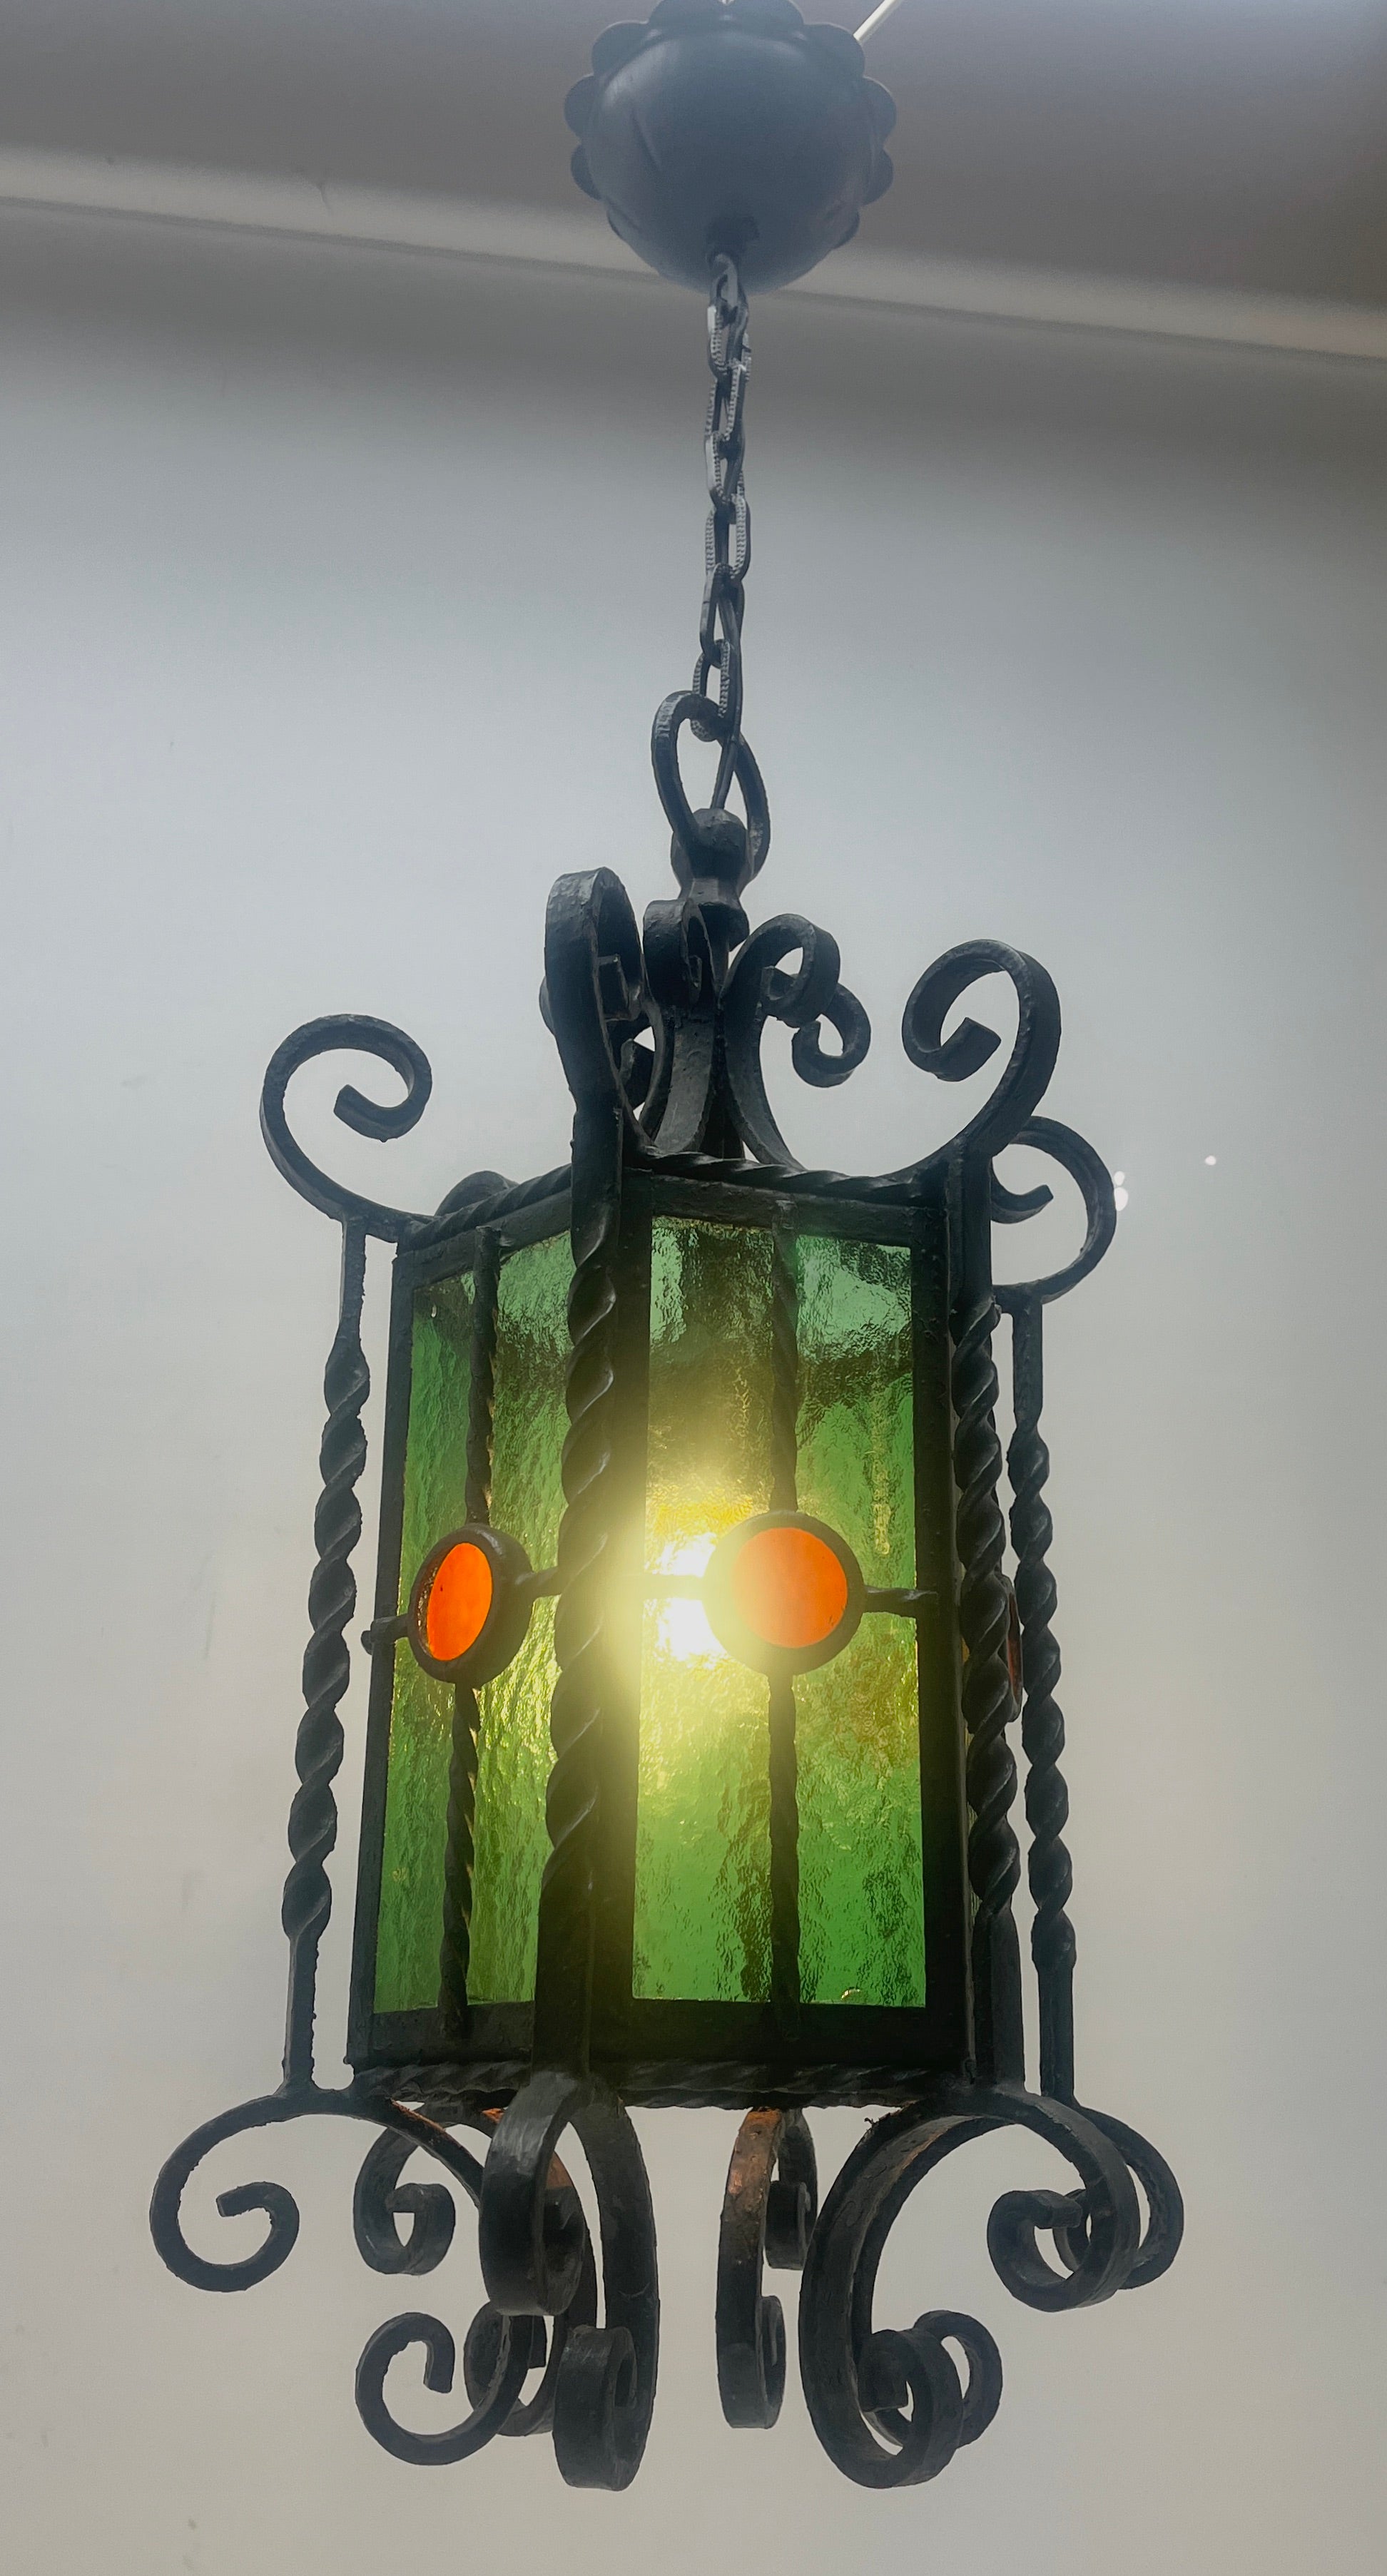 Forget and colored glass pendant lamp.
Materials: Colored glass Black painted curved iron slats pleated as a cage.
Metal chain and canopy. E27 socket.
Original patina on all parts.

In Good condition and in full working order. 
And safe for